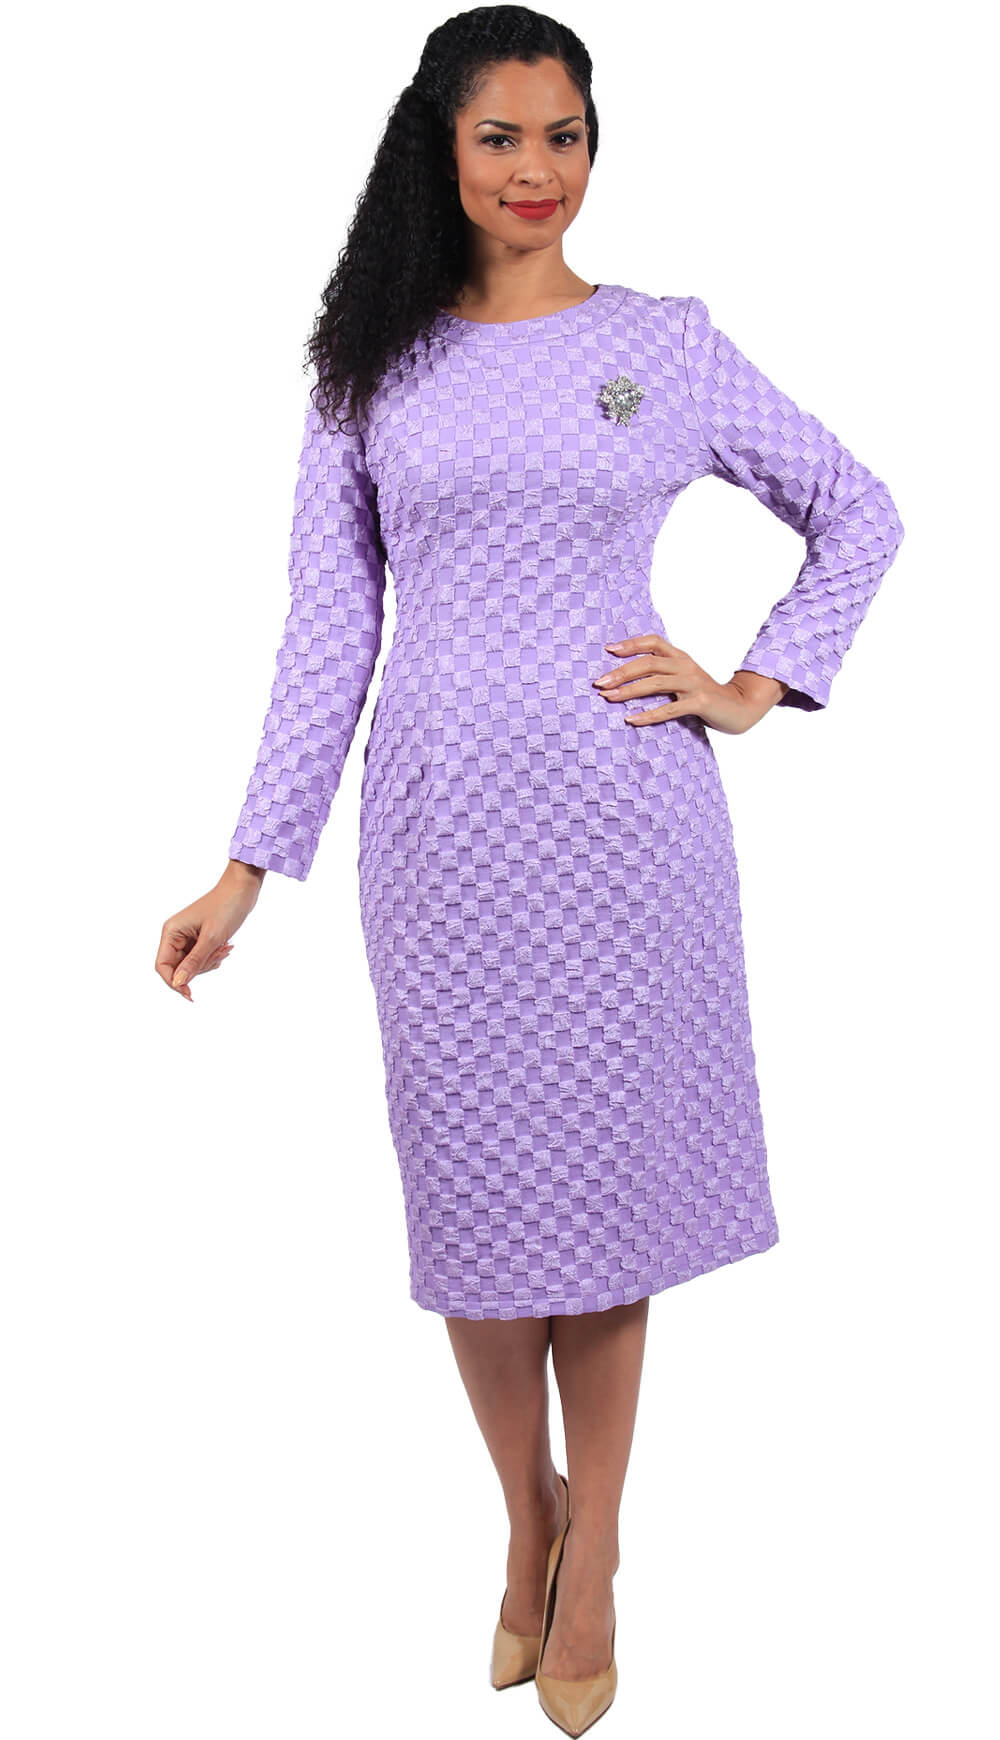 Diana Couture Dress 8675-Lilac - Church Suits For Less